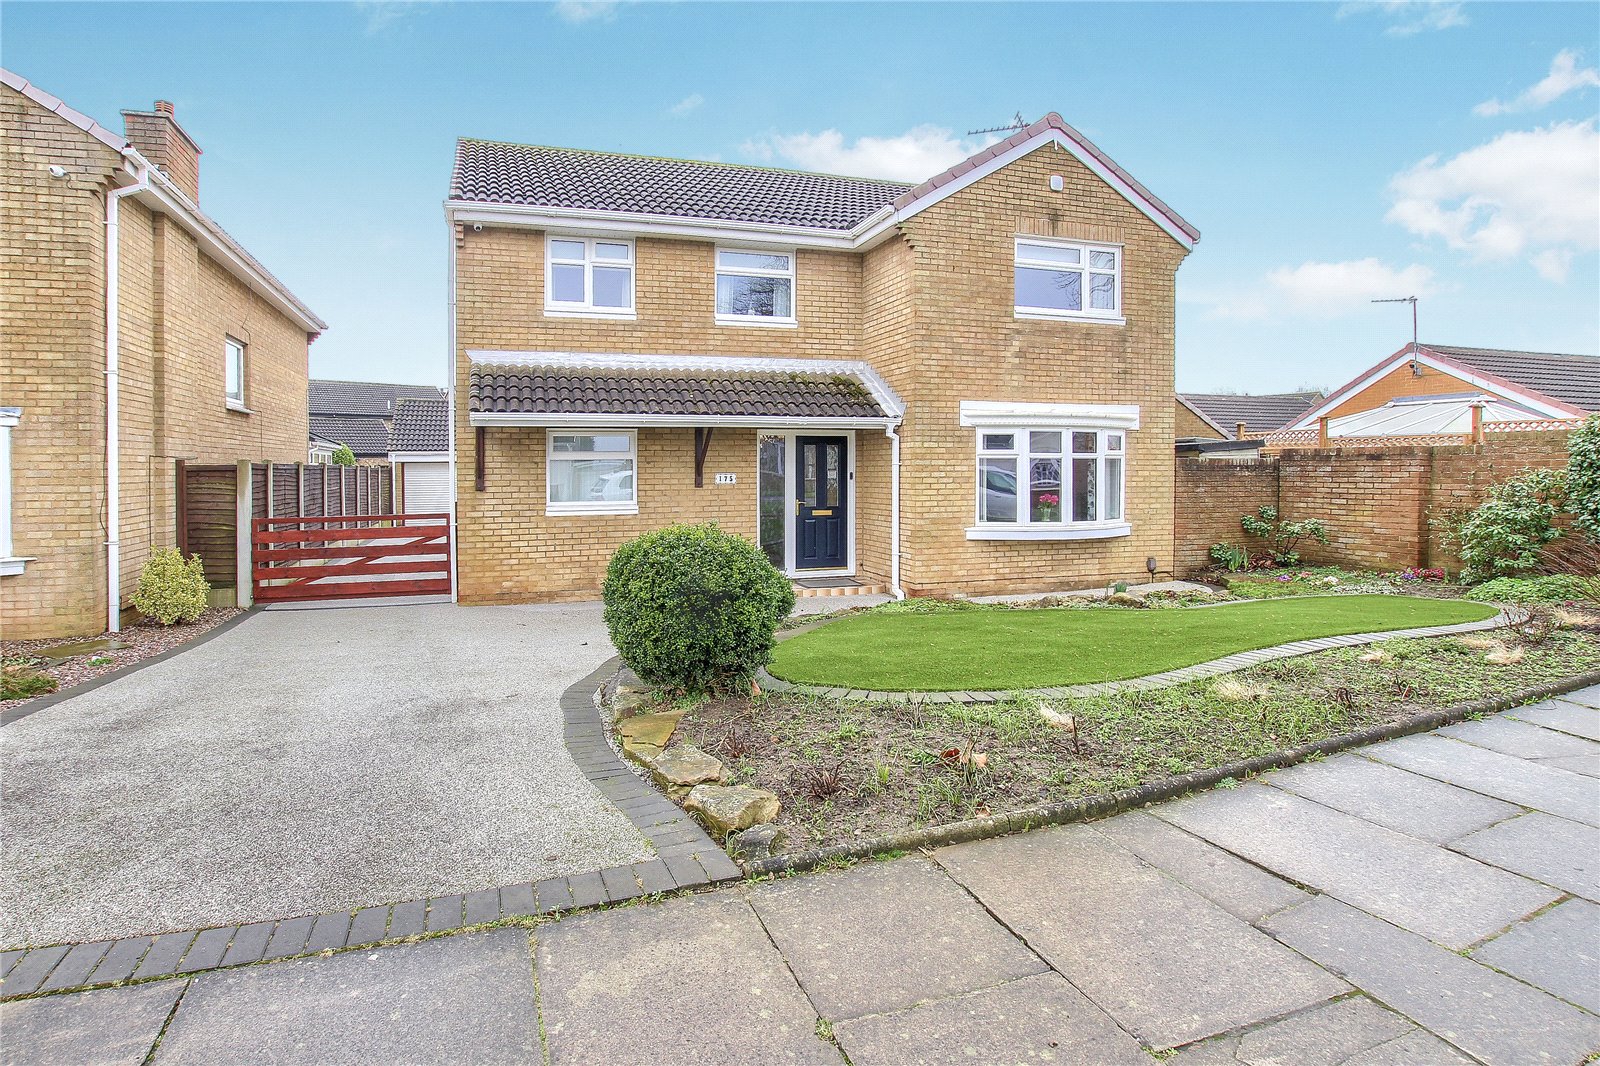 4 bed house for sale in Wolviston Court, Billingham  - Property Image 1